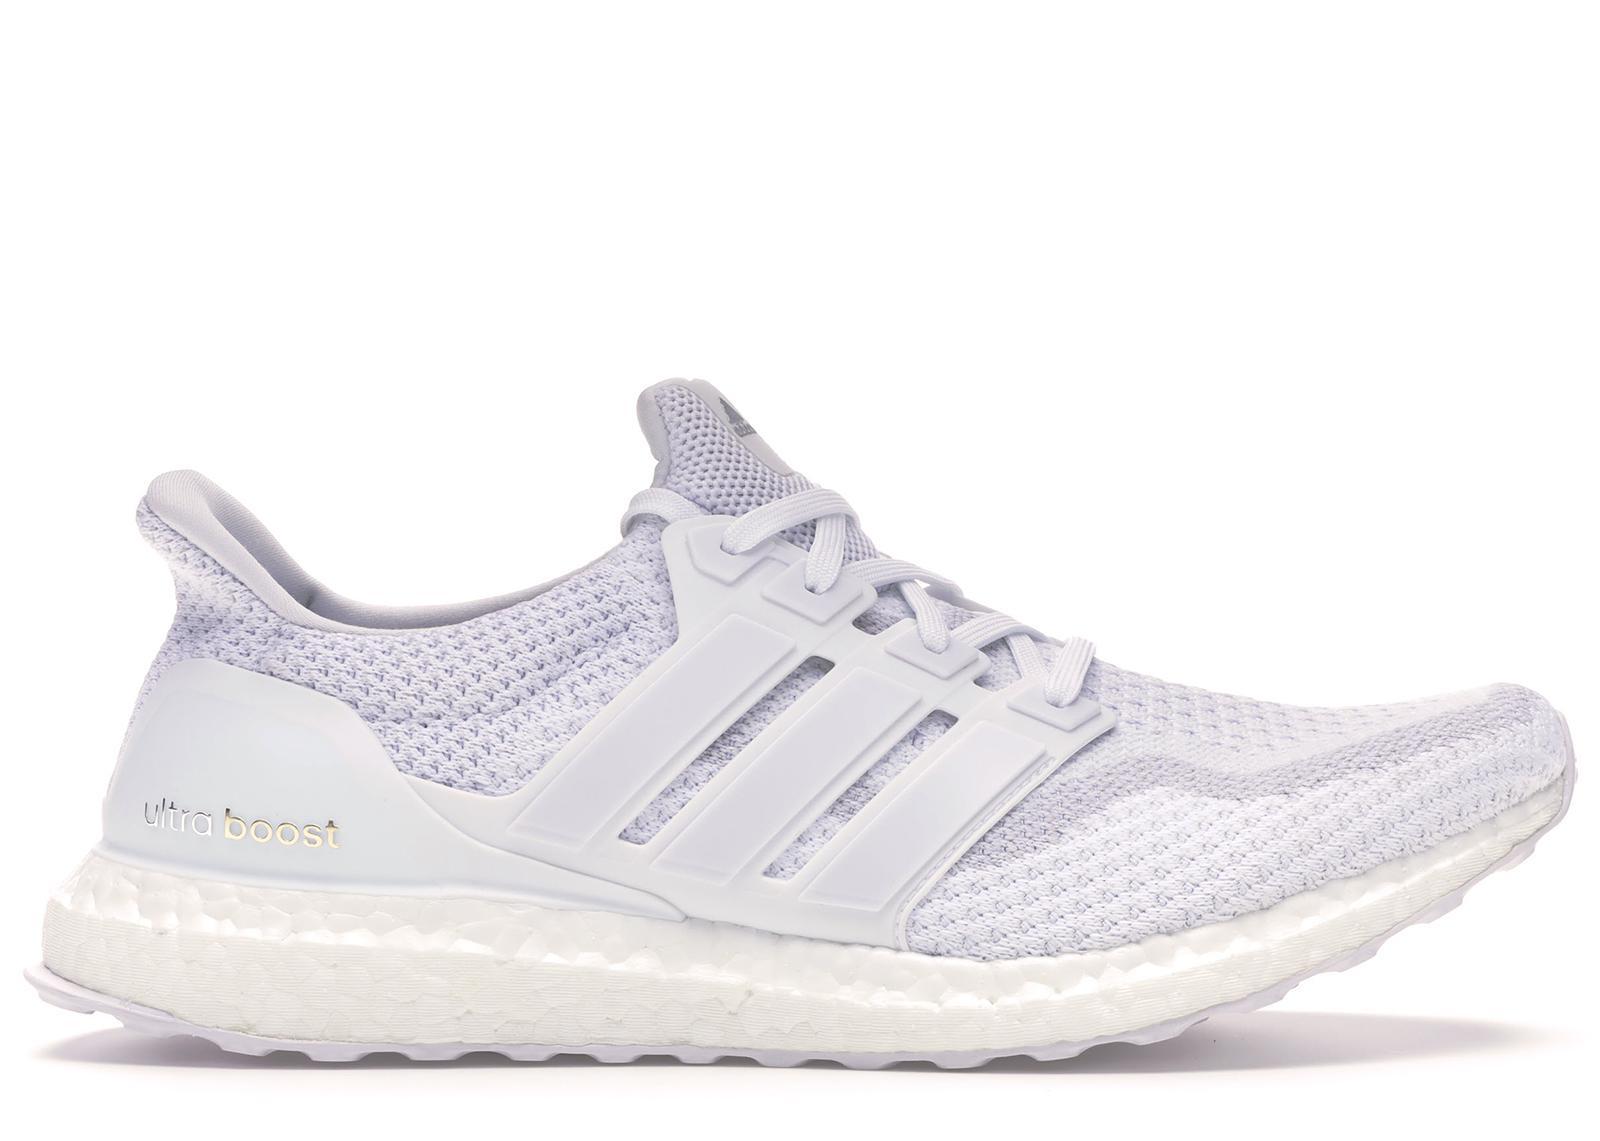 adidas Ultra Boost 2.0 Triple White for Men - Lyst